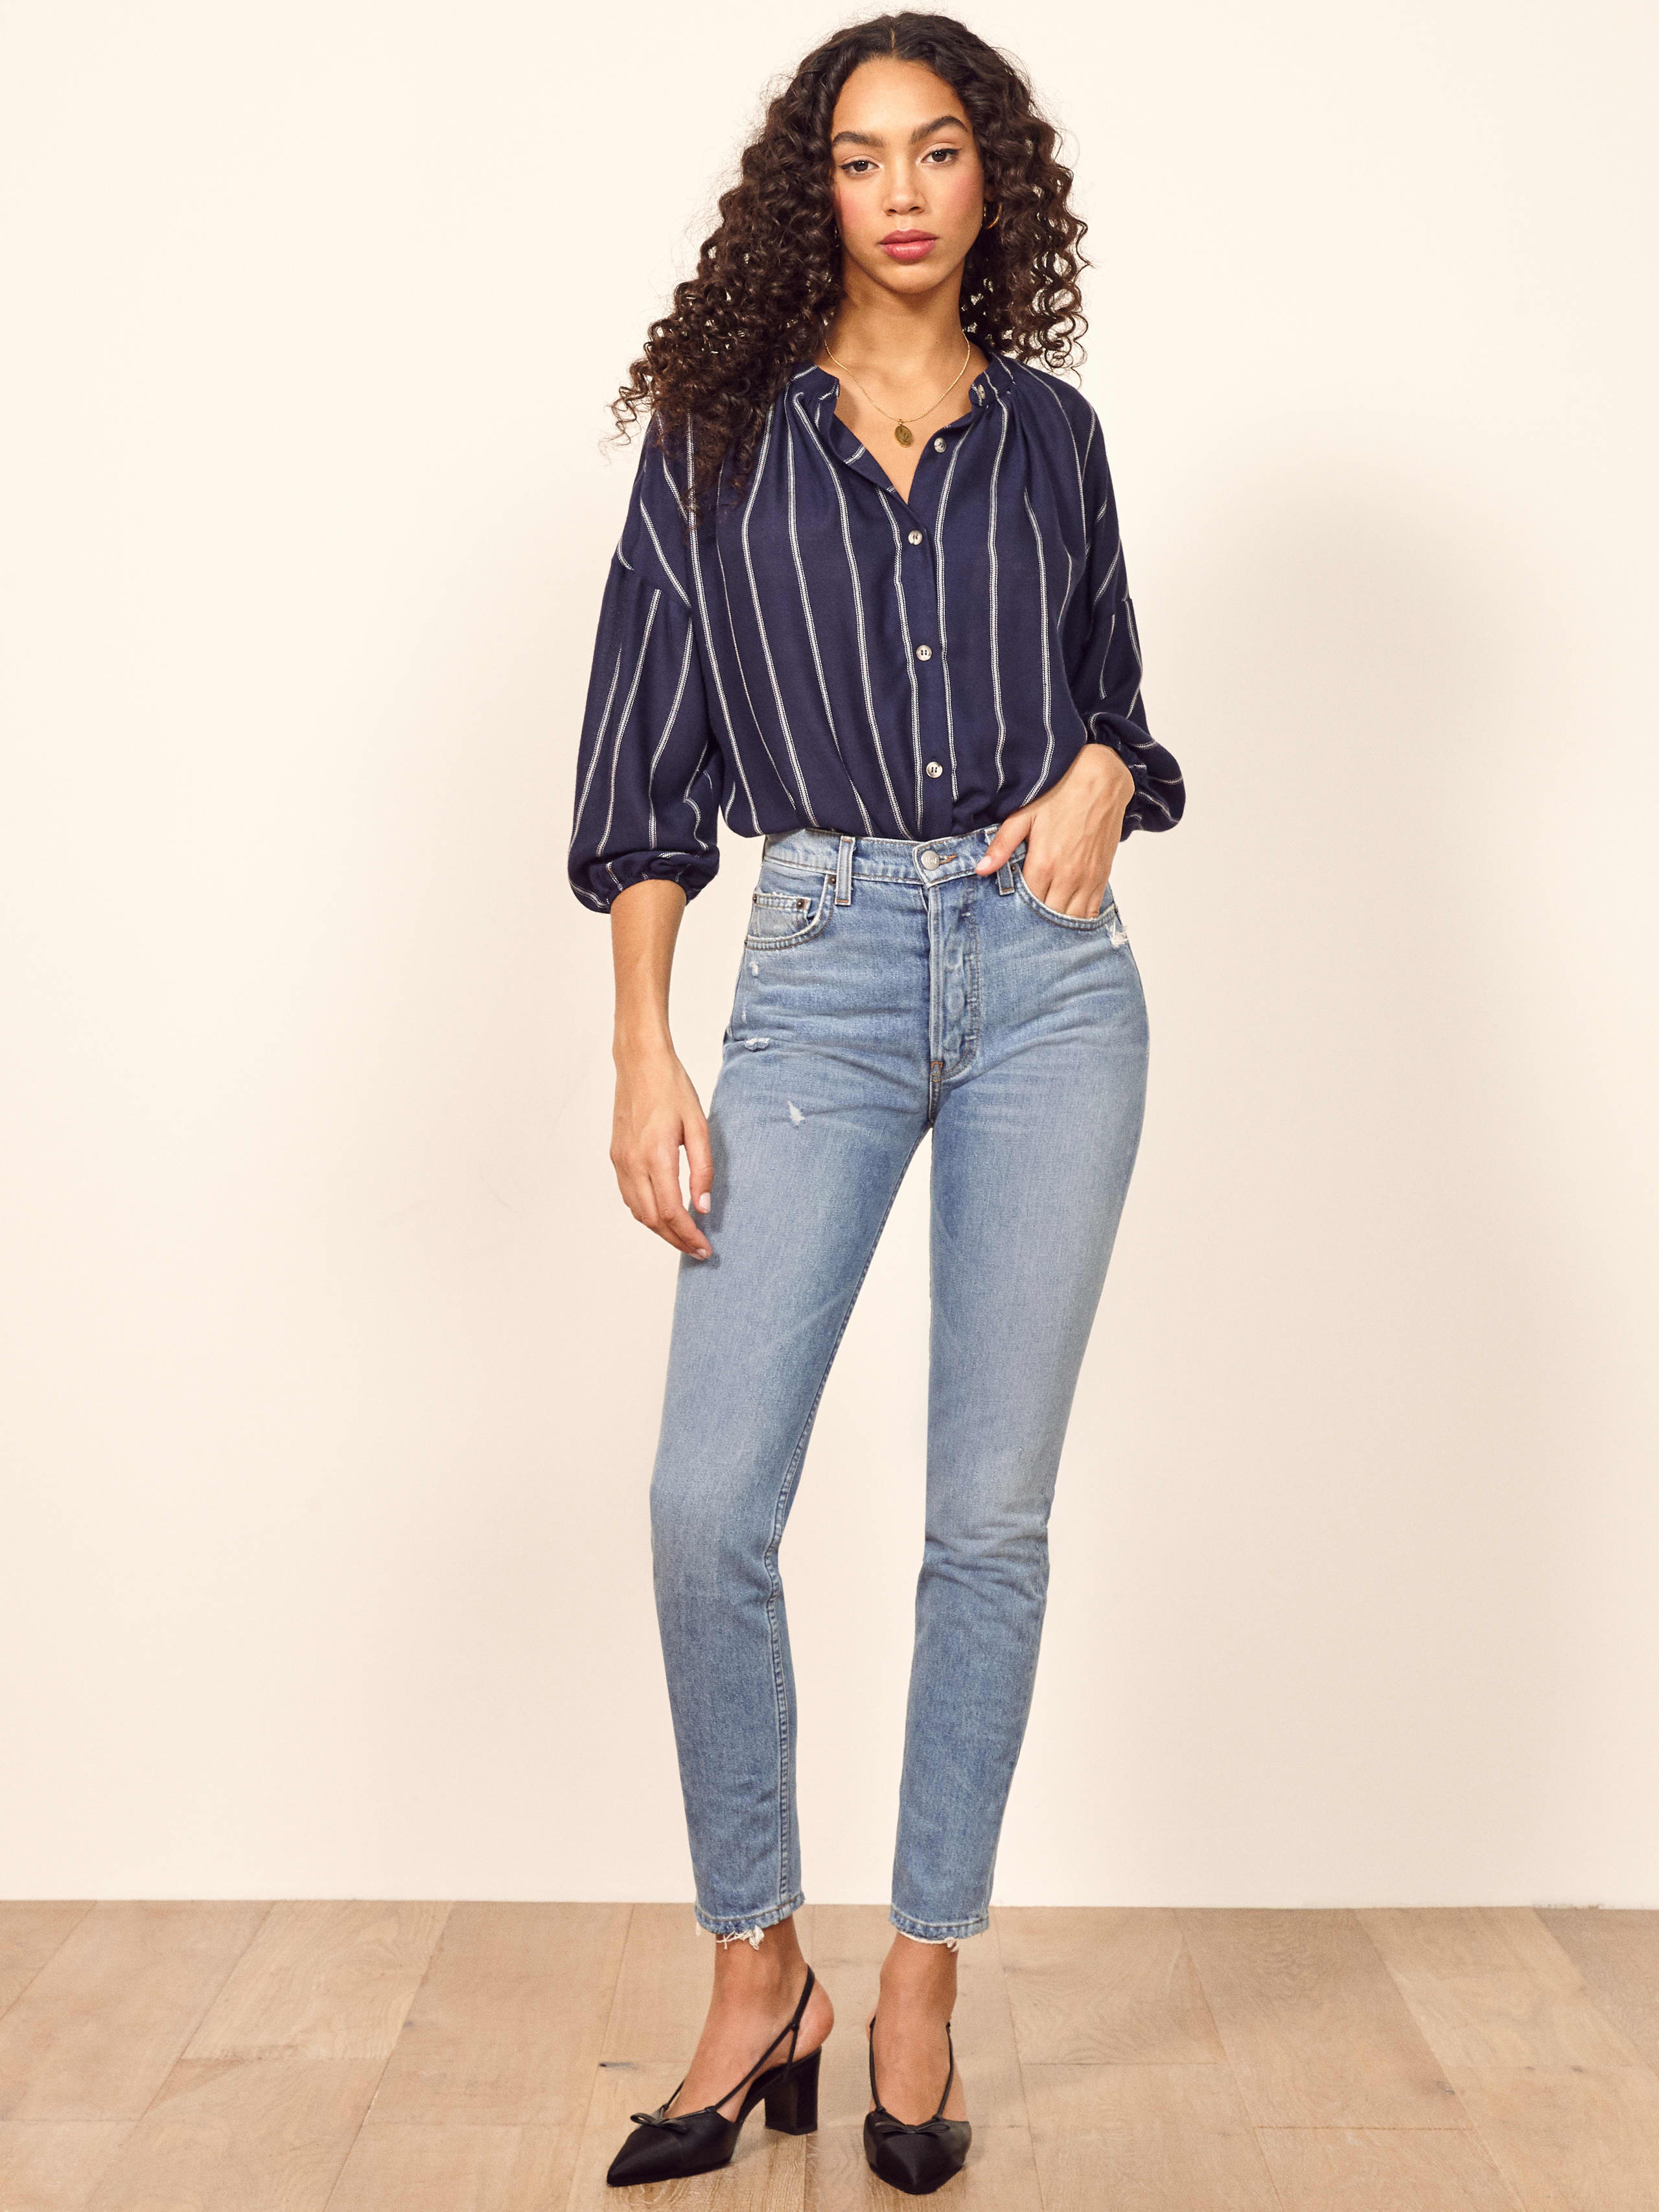 reformation high and skinny jean